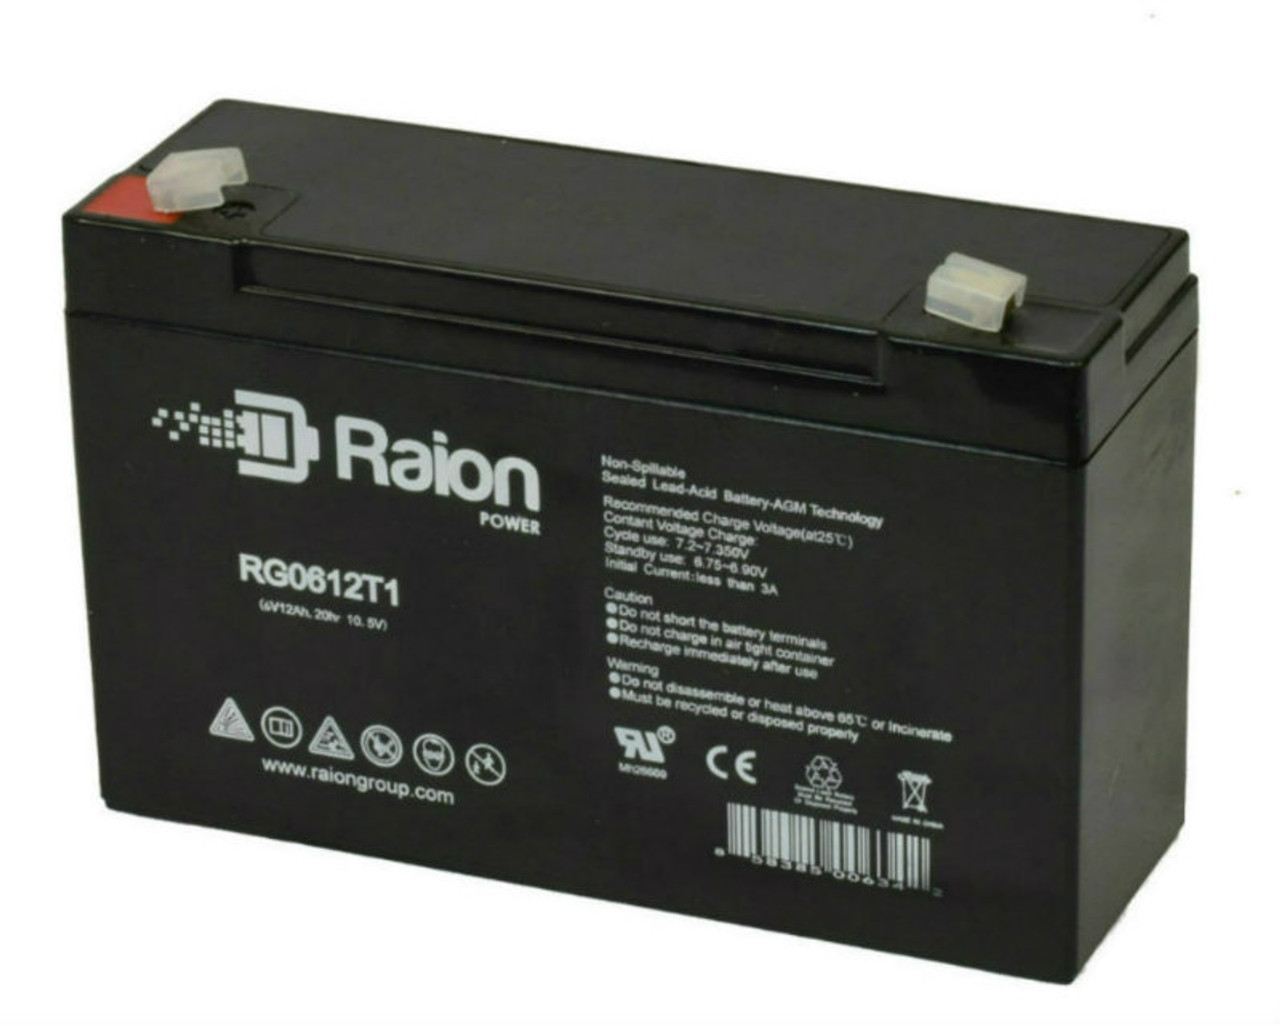 Raion Power RG06120T1 Replacement 6V 12Ah Emergency Light Battery for Siltron SN680